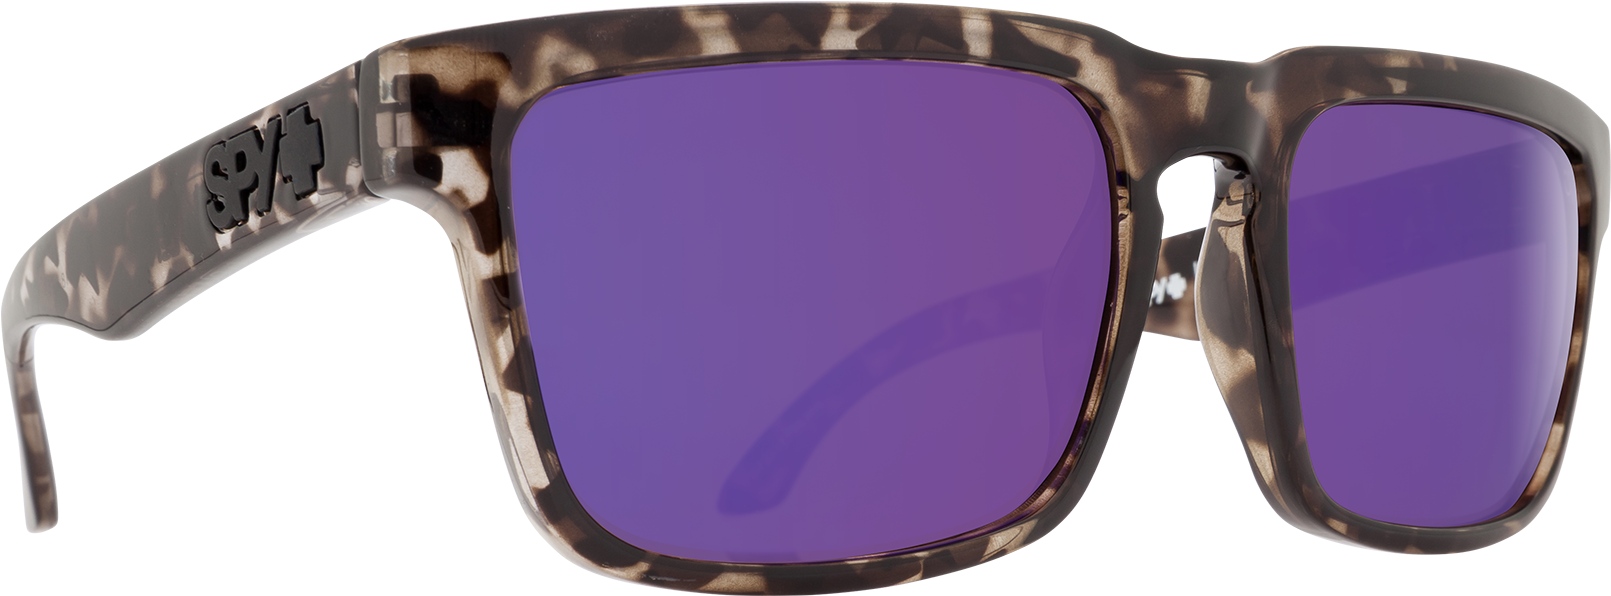 Variations - Spy Helm Sunglasses (2000x1200), Png Download